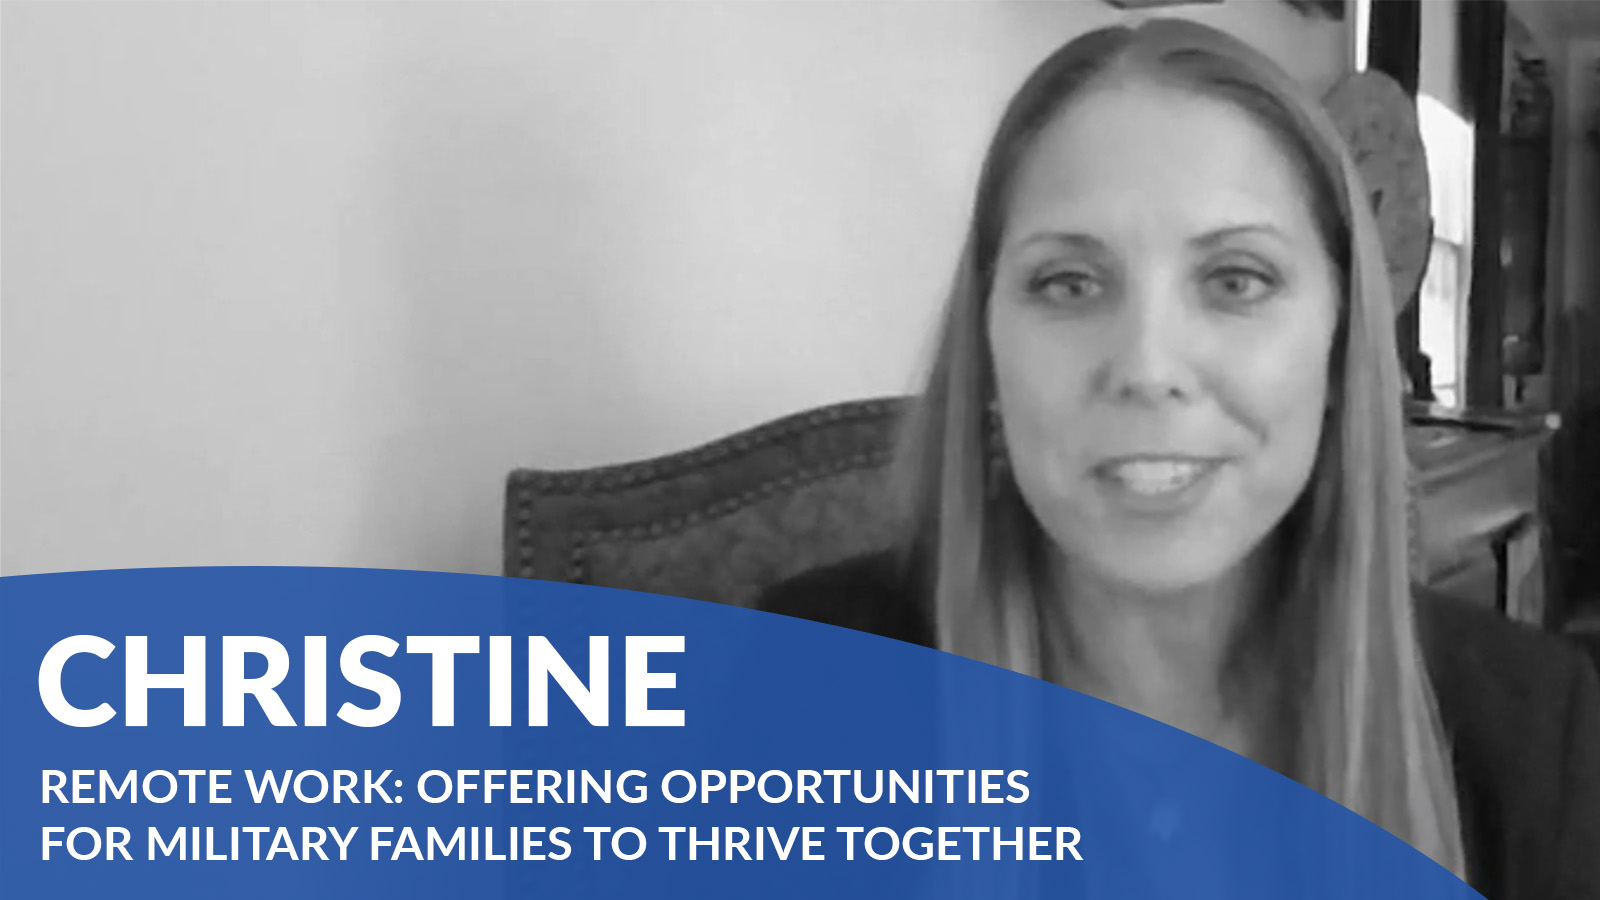 christine's story - remote work: offering opportunities for military families to thrive together